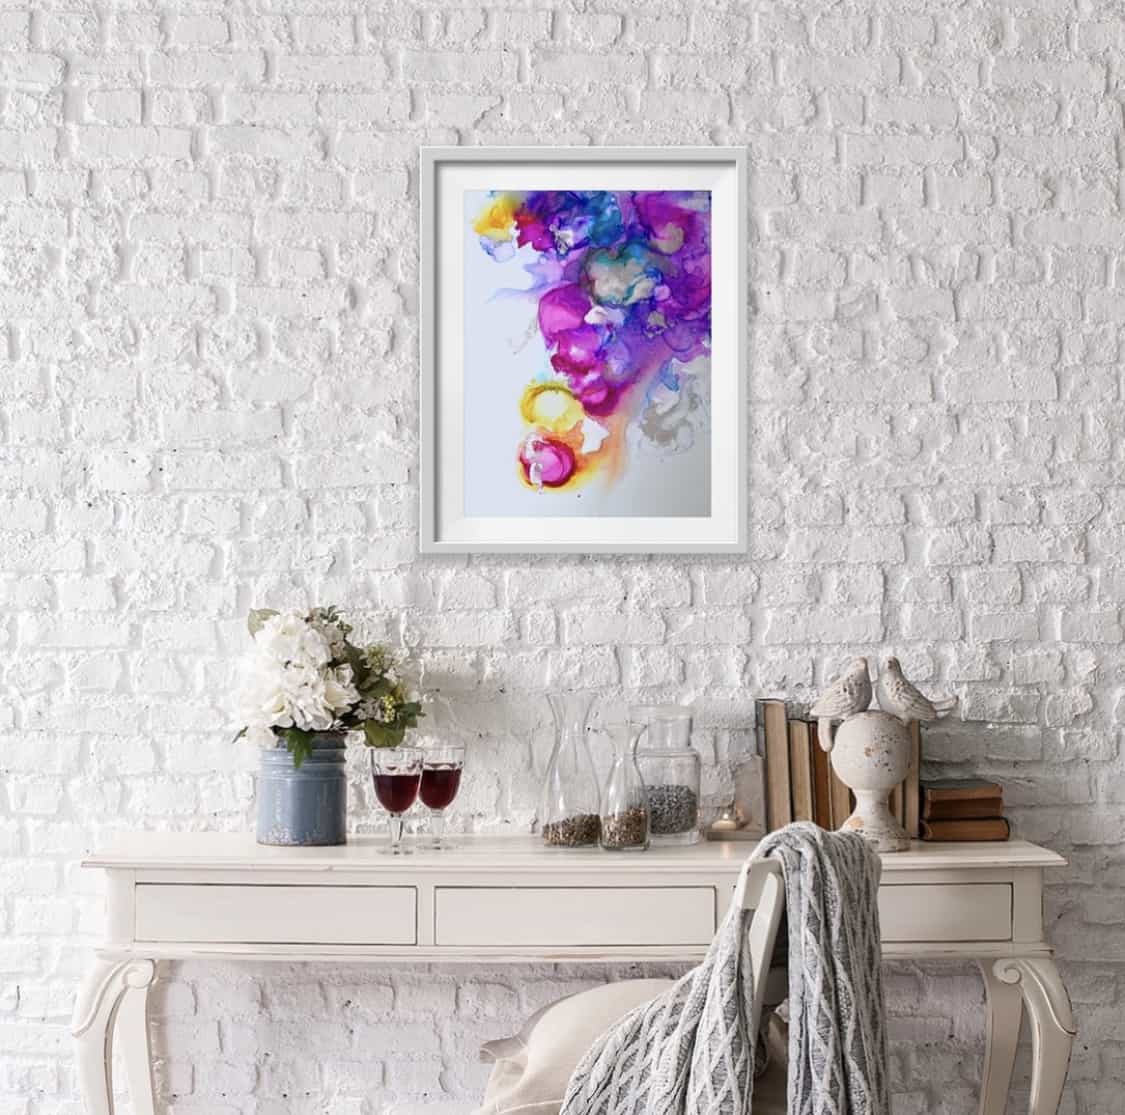 Abstract Colorful Alcohol Ink Painting Hanging on Wall